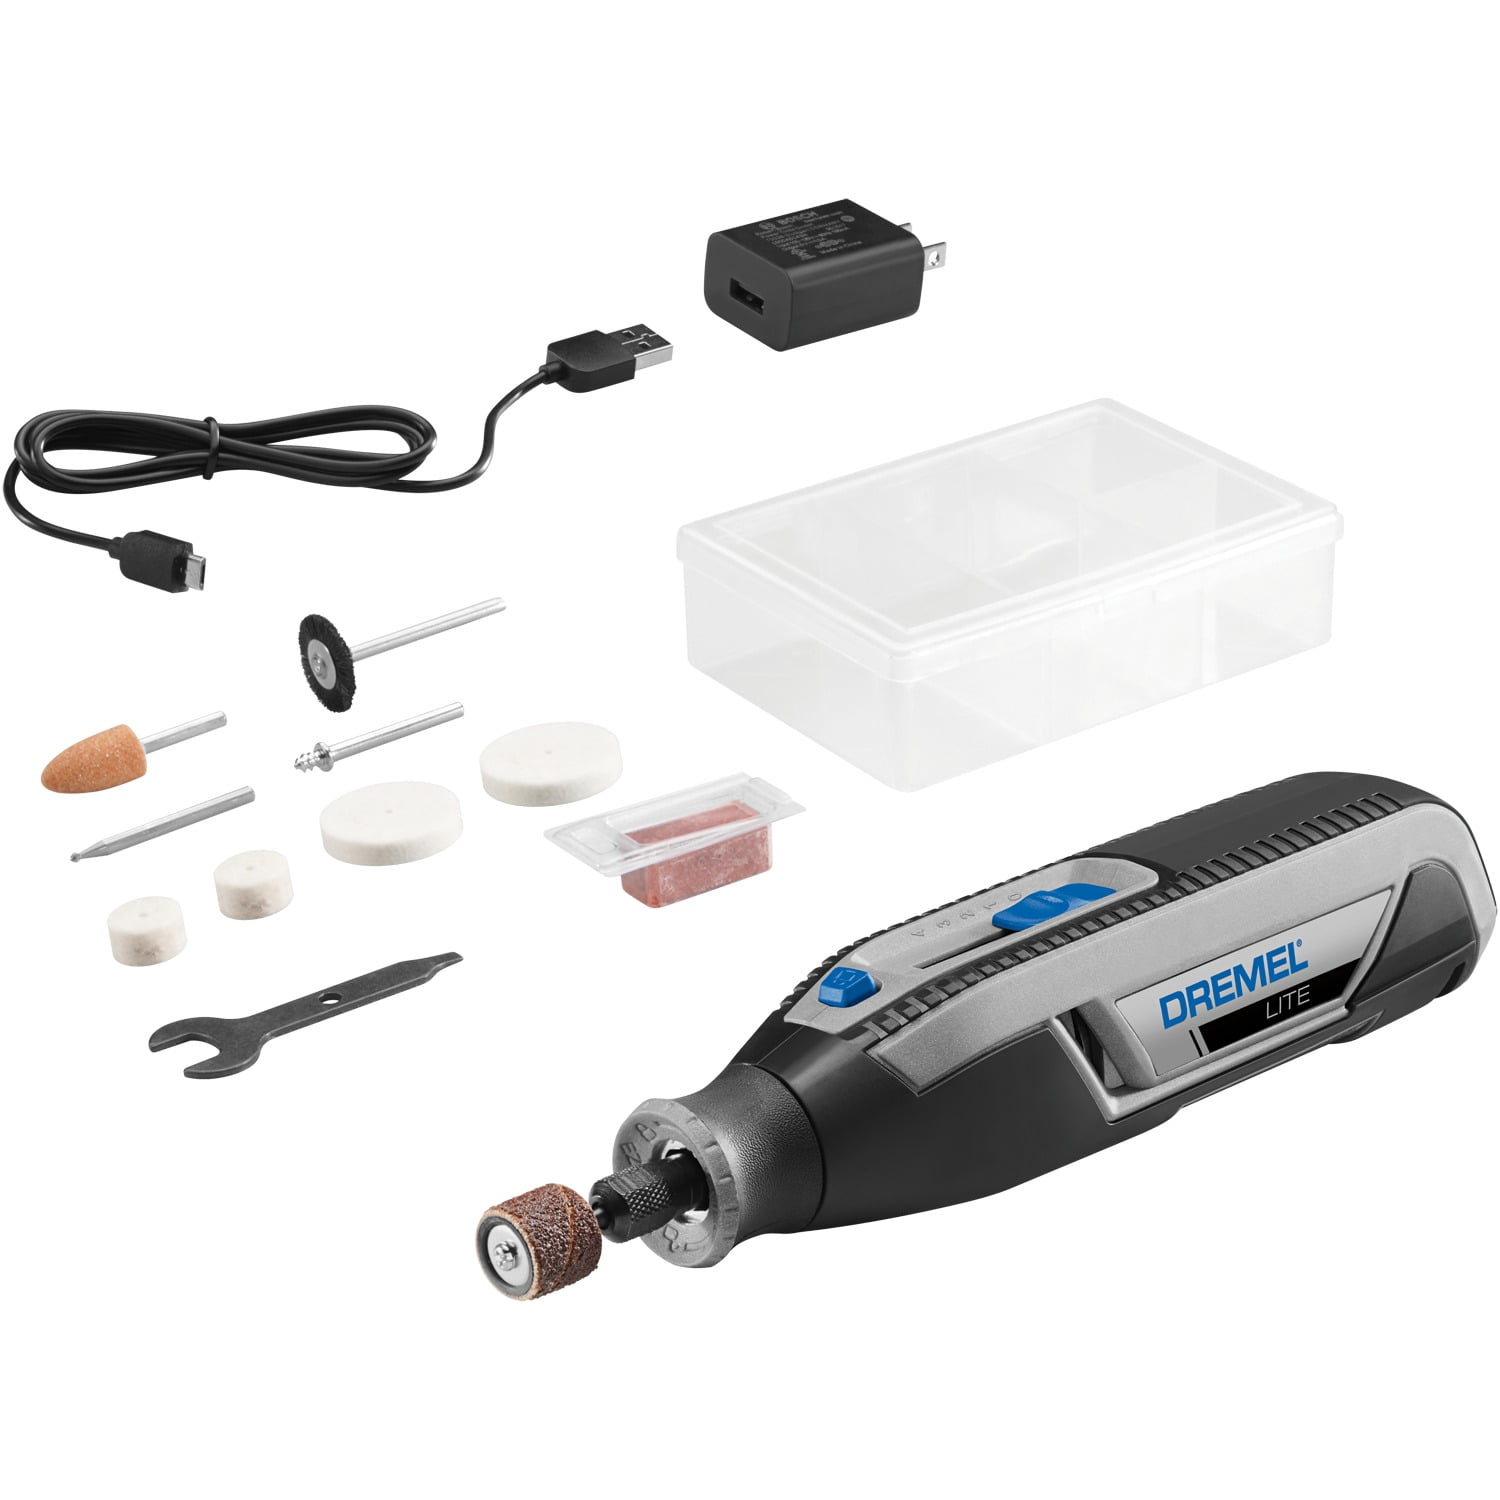 Dremel A679-03 Rotary Tool Sharpening Kit, 3 Attachments and 4 Accessories